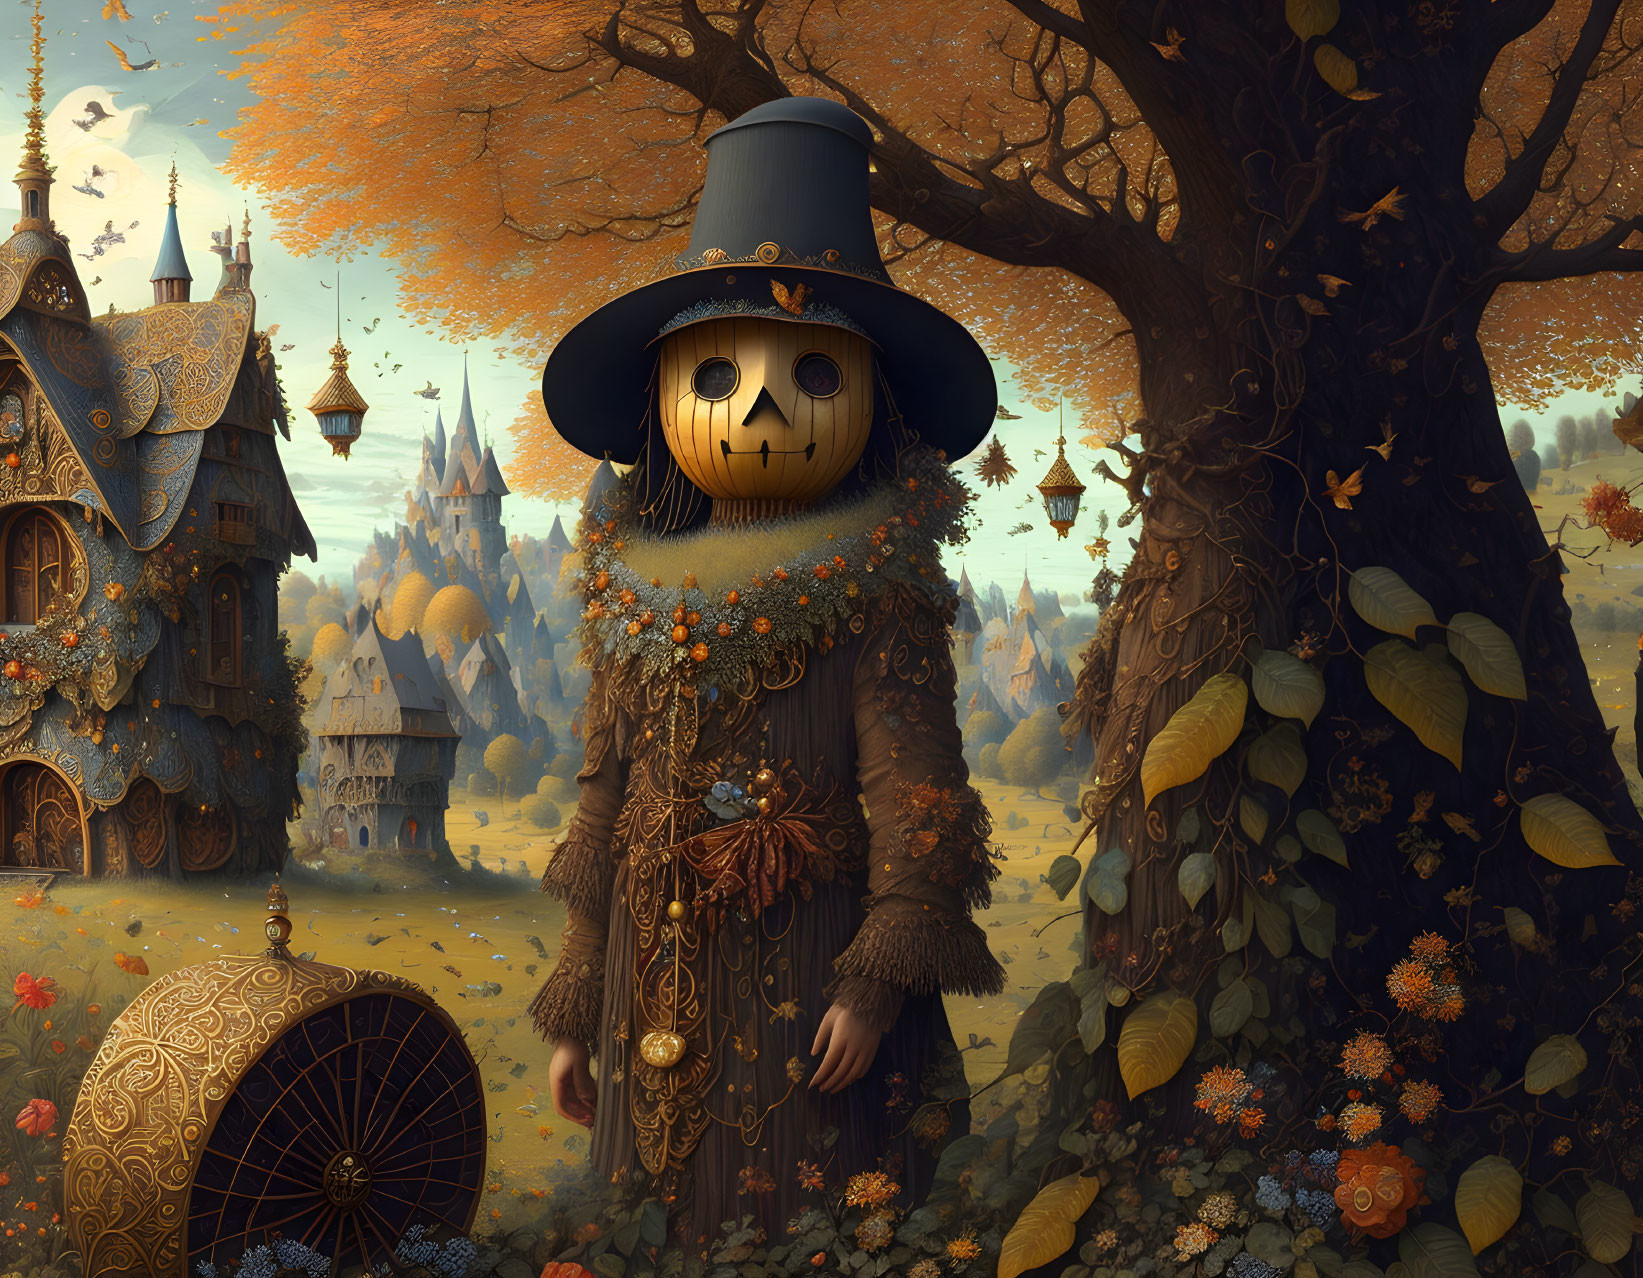 Autumn-themed fantasy landscape with scarecrow, castle, and fall foliage